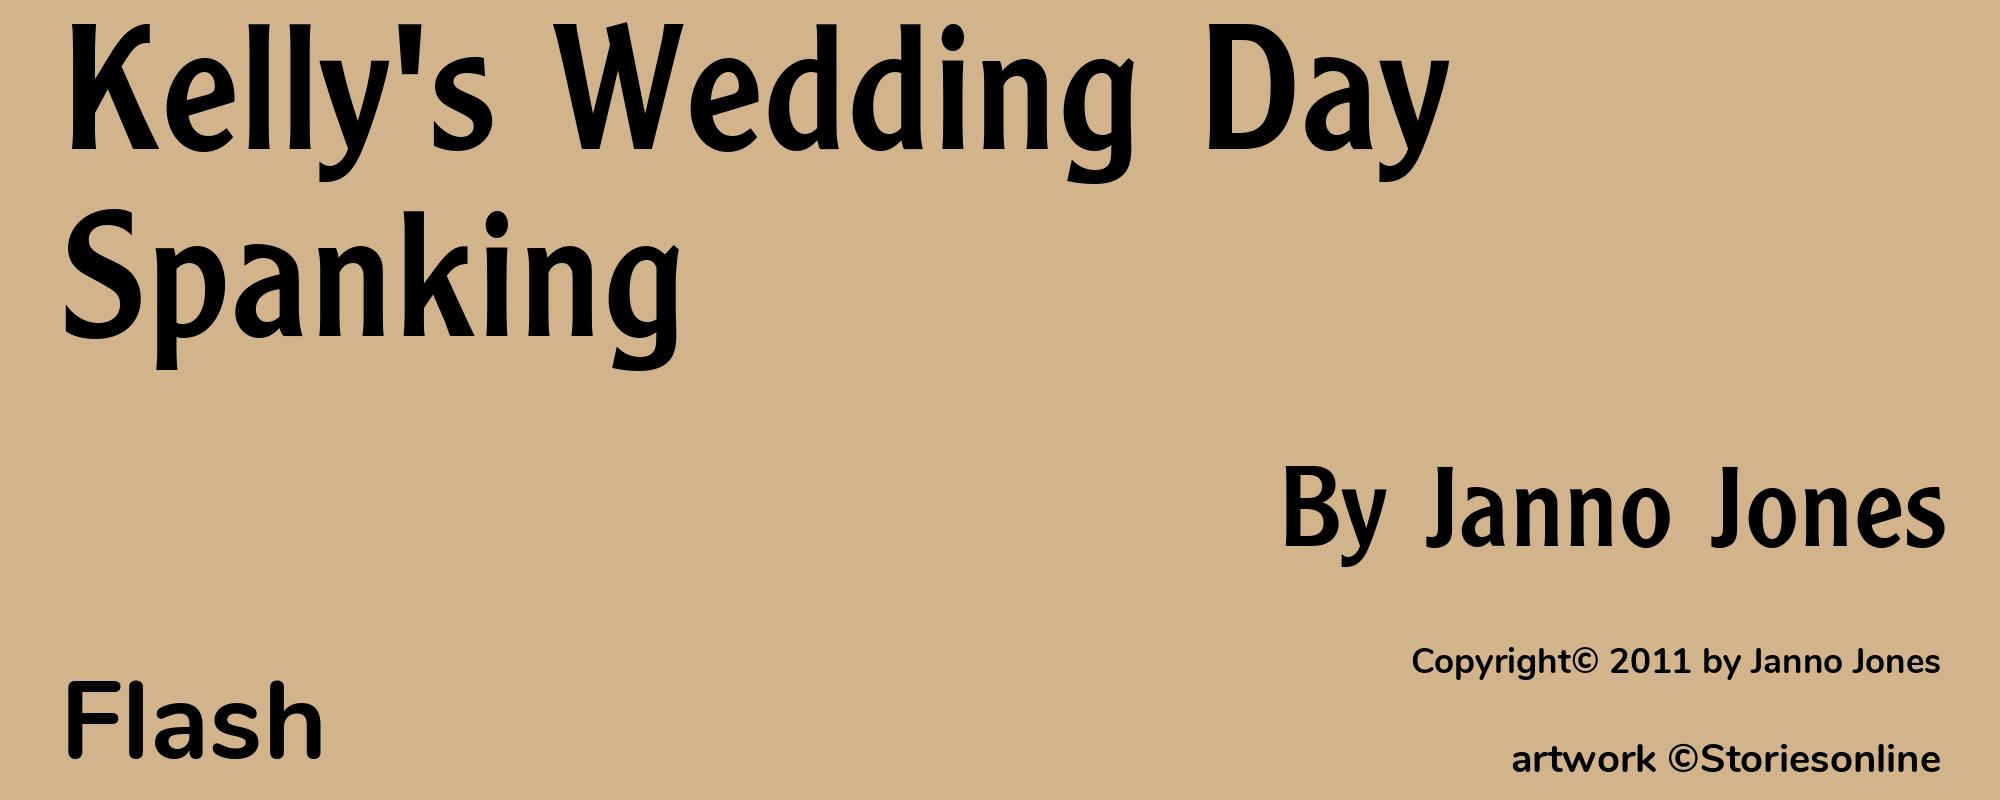 Kelly's Wedding Day Spanking - Cover